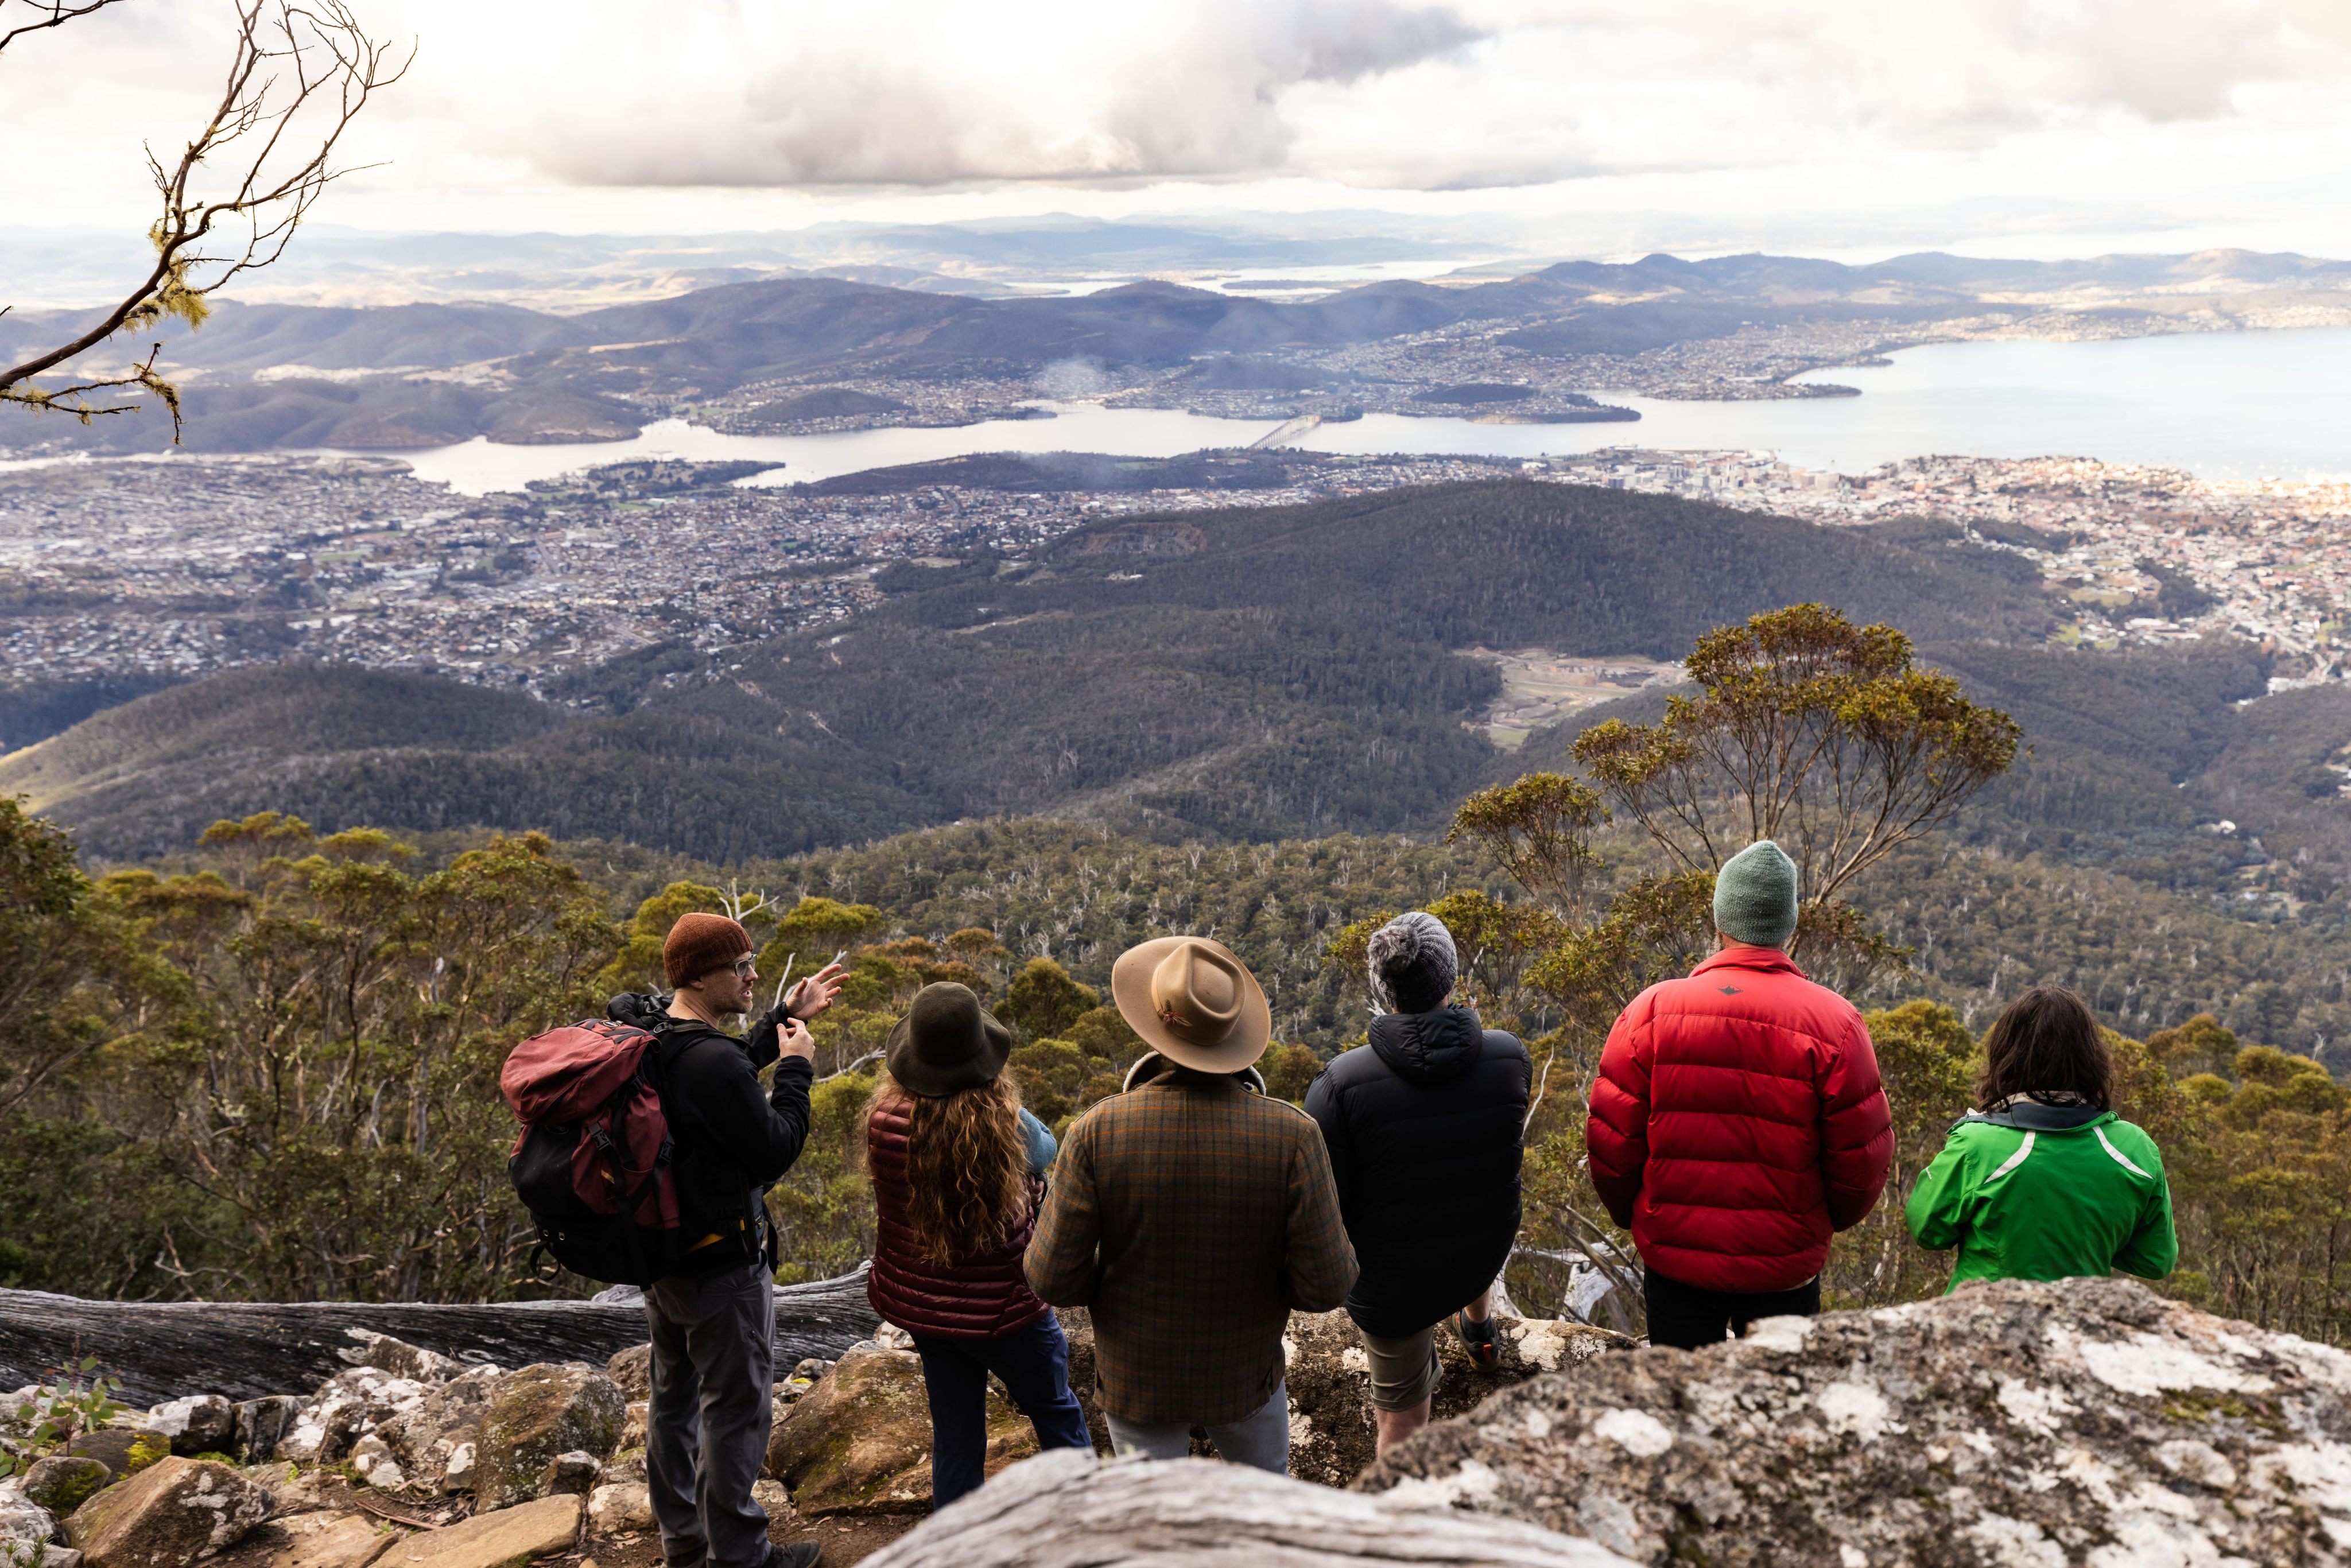 Mount Wellington is one of the places Hong Kong boy band Mirror visited on their recent tour of Tasmania, Australia, for their Christmas TV special on ViuTV. We take a look at where the Cantopop stars ventured, and what they did there. Photo: Tourism Tasmania